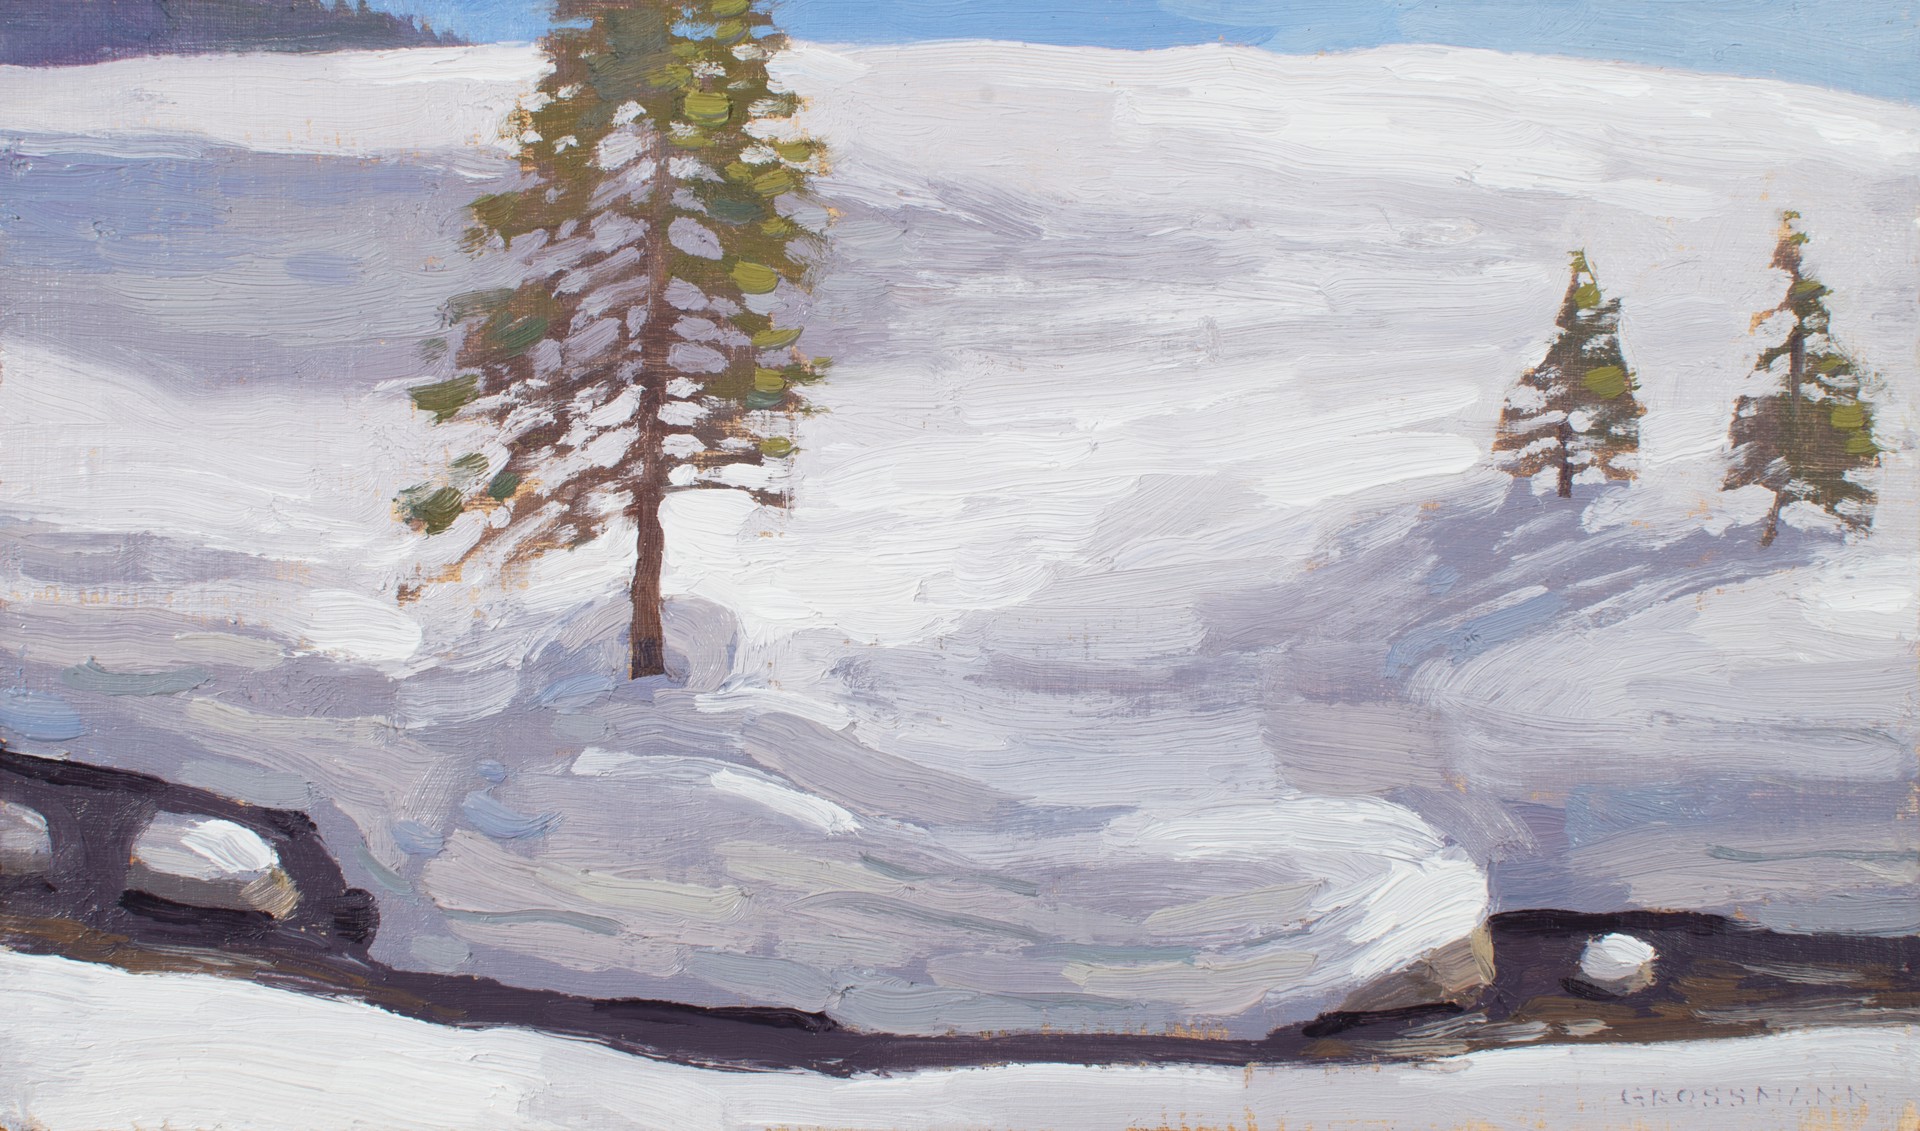 Snow Shapes and Pine Trees Beside Mesa Creek by David Grossmann